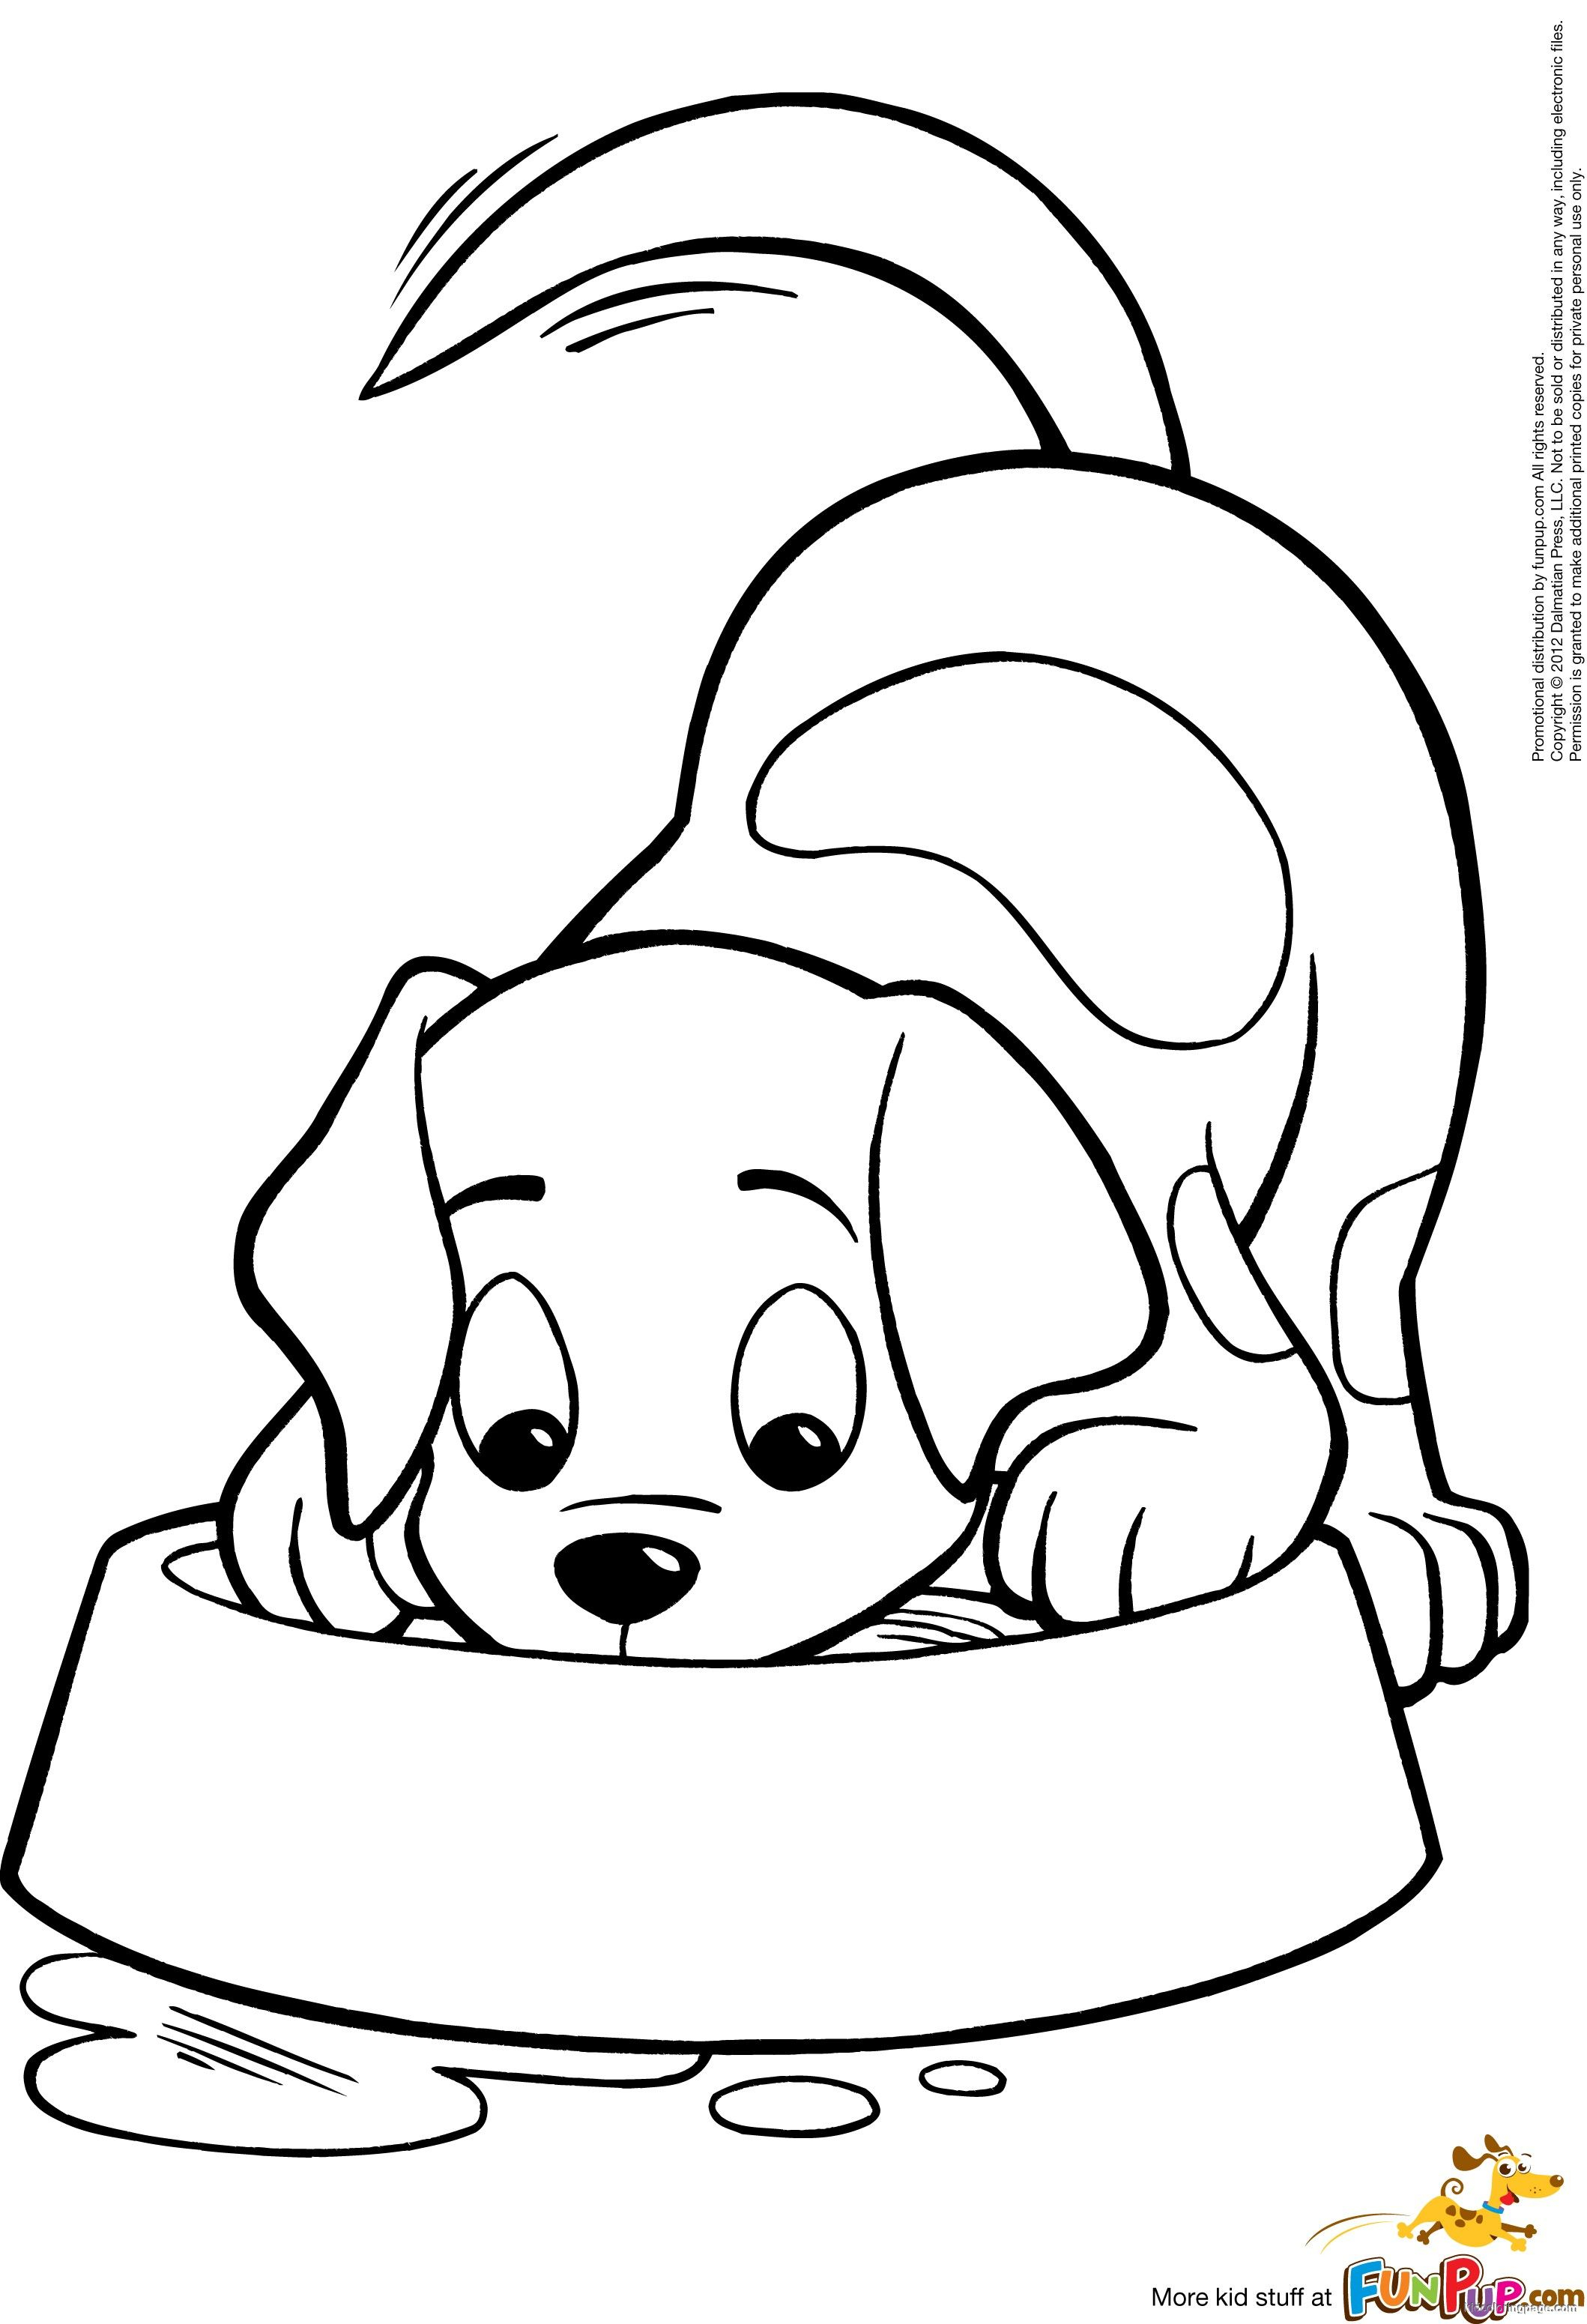 Little Puppy Coloring Pages Animal Coloring Pages Puppies Photo Album Sabadaphnecottage